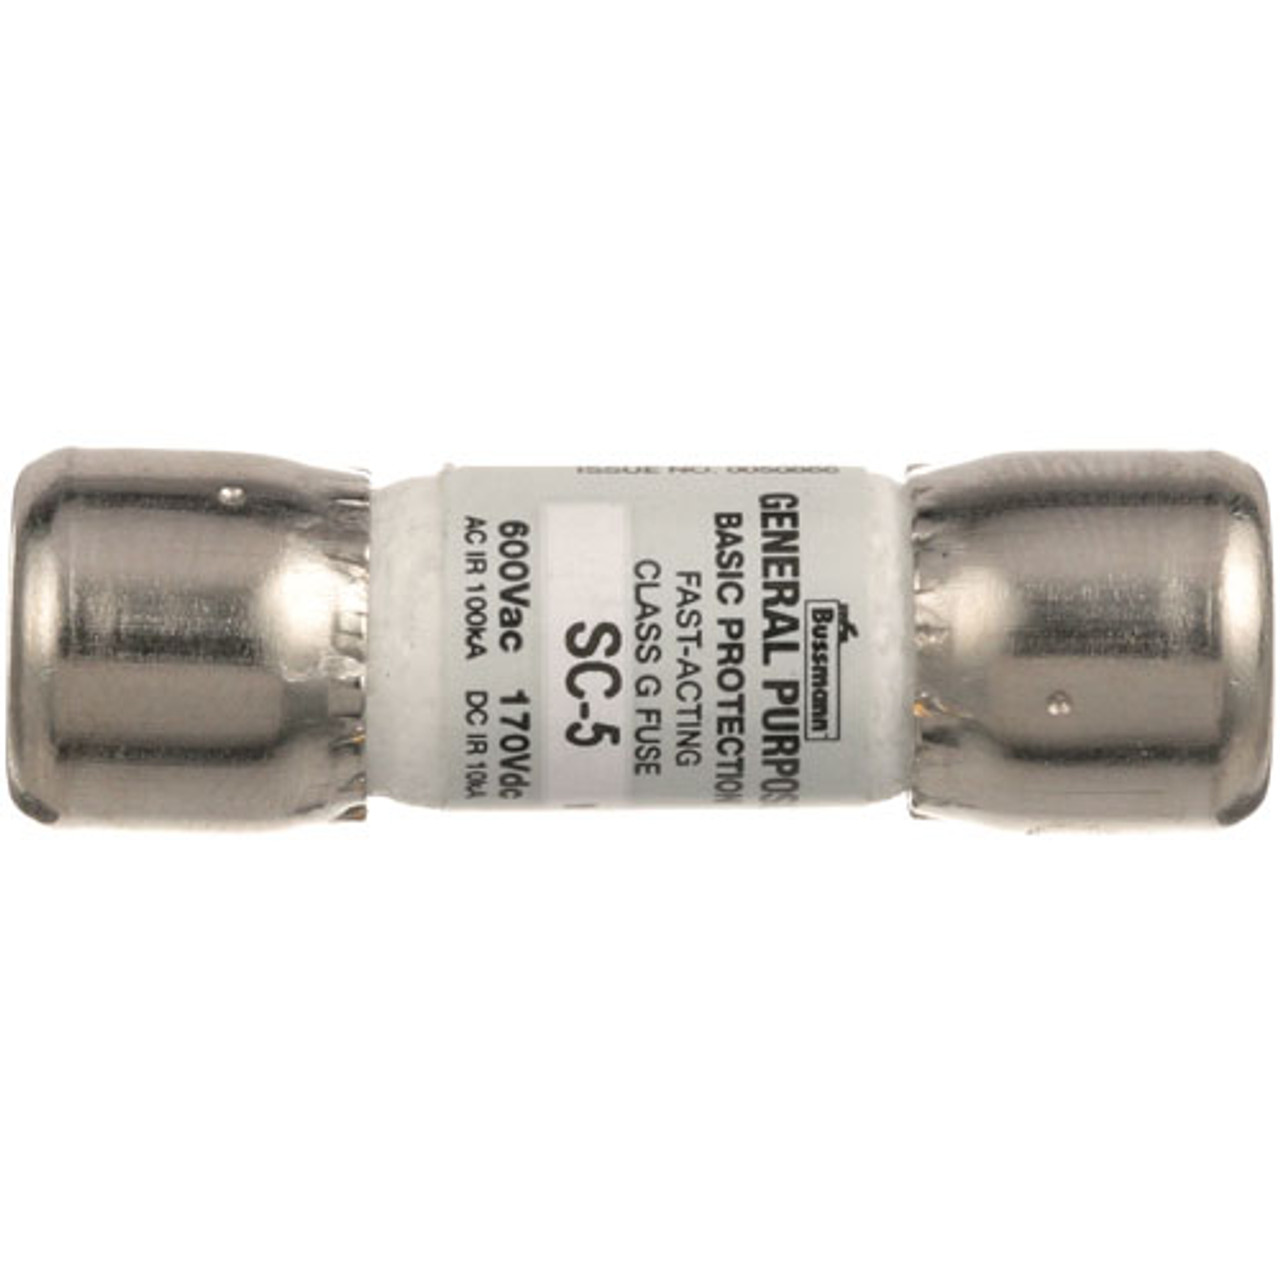 Fuse - Replacement Part For Star Mfg Y2342